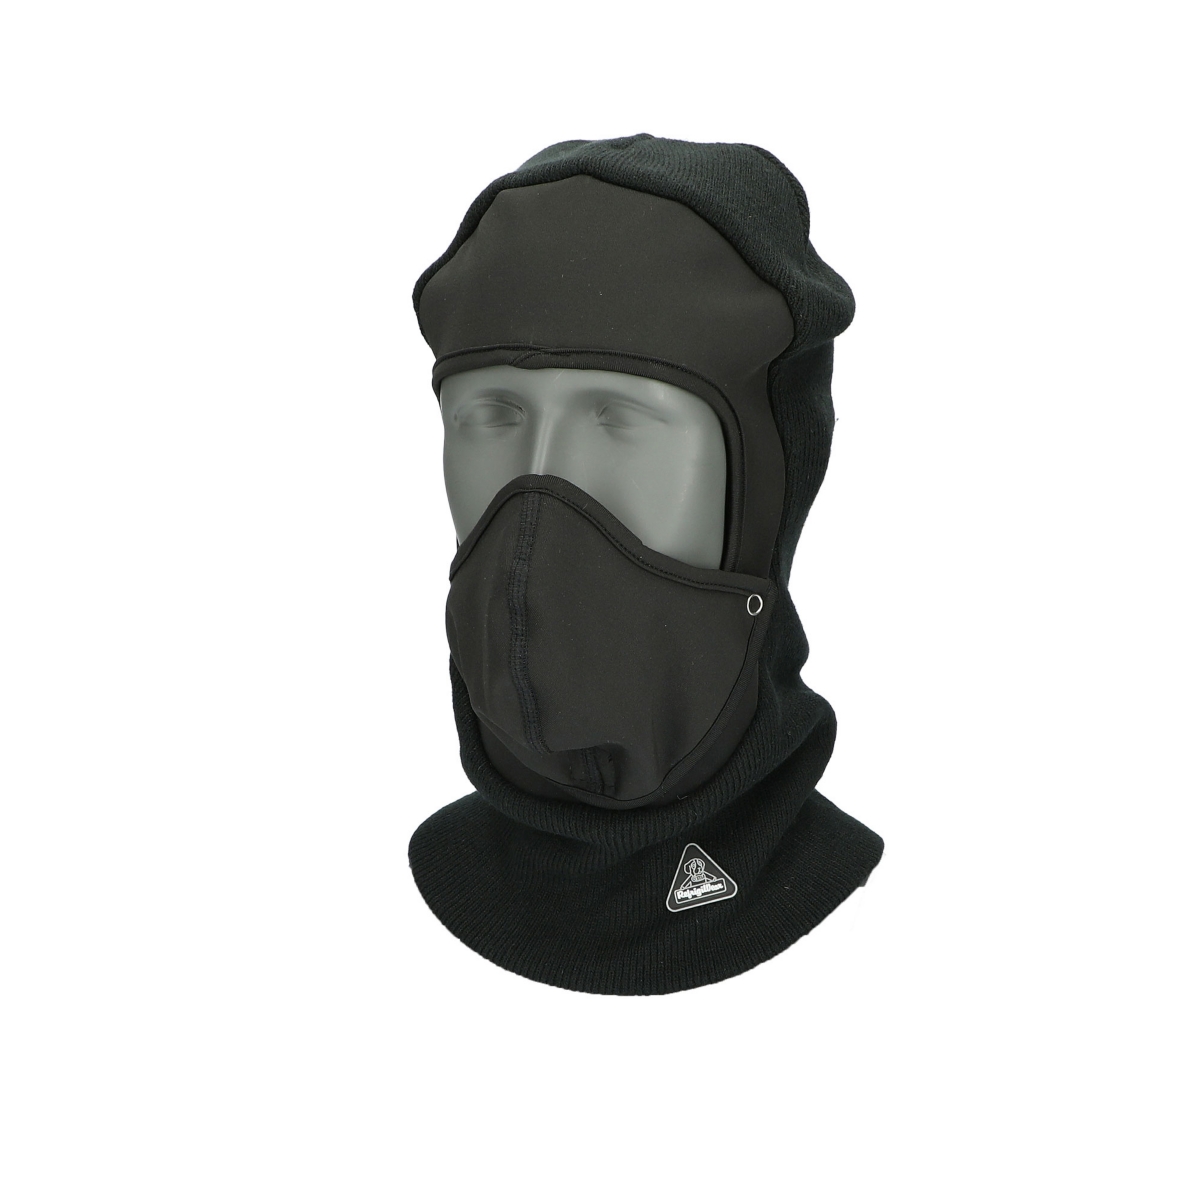 Men's Thermal Knit Mask with Detachable Mouthpiece - Black